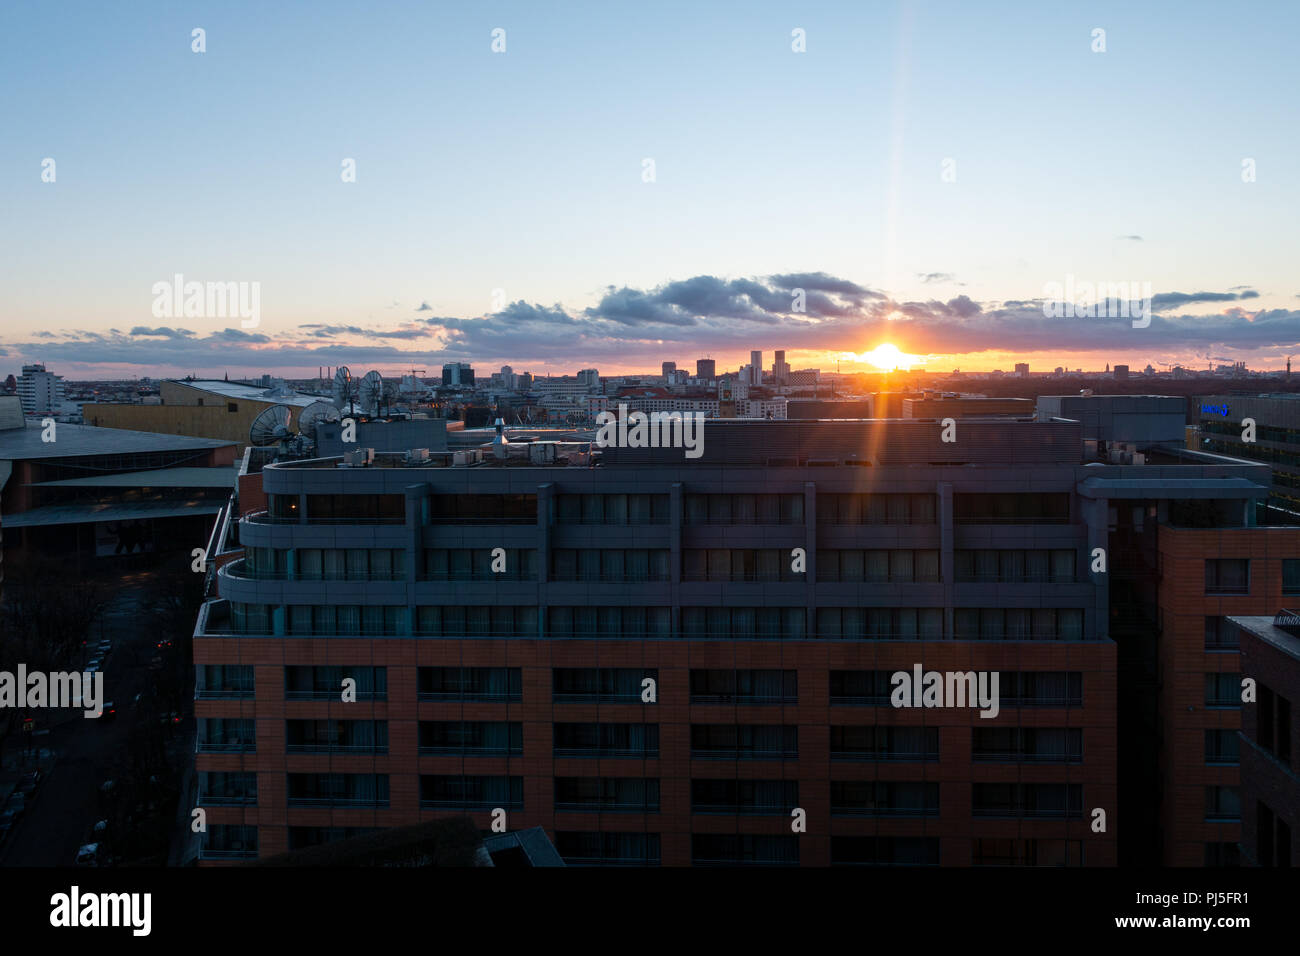 View over the Potsdamer Platz area in Berlin at sunset. Stock Photo